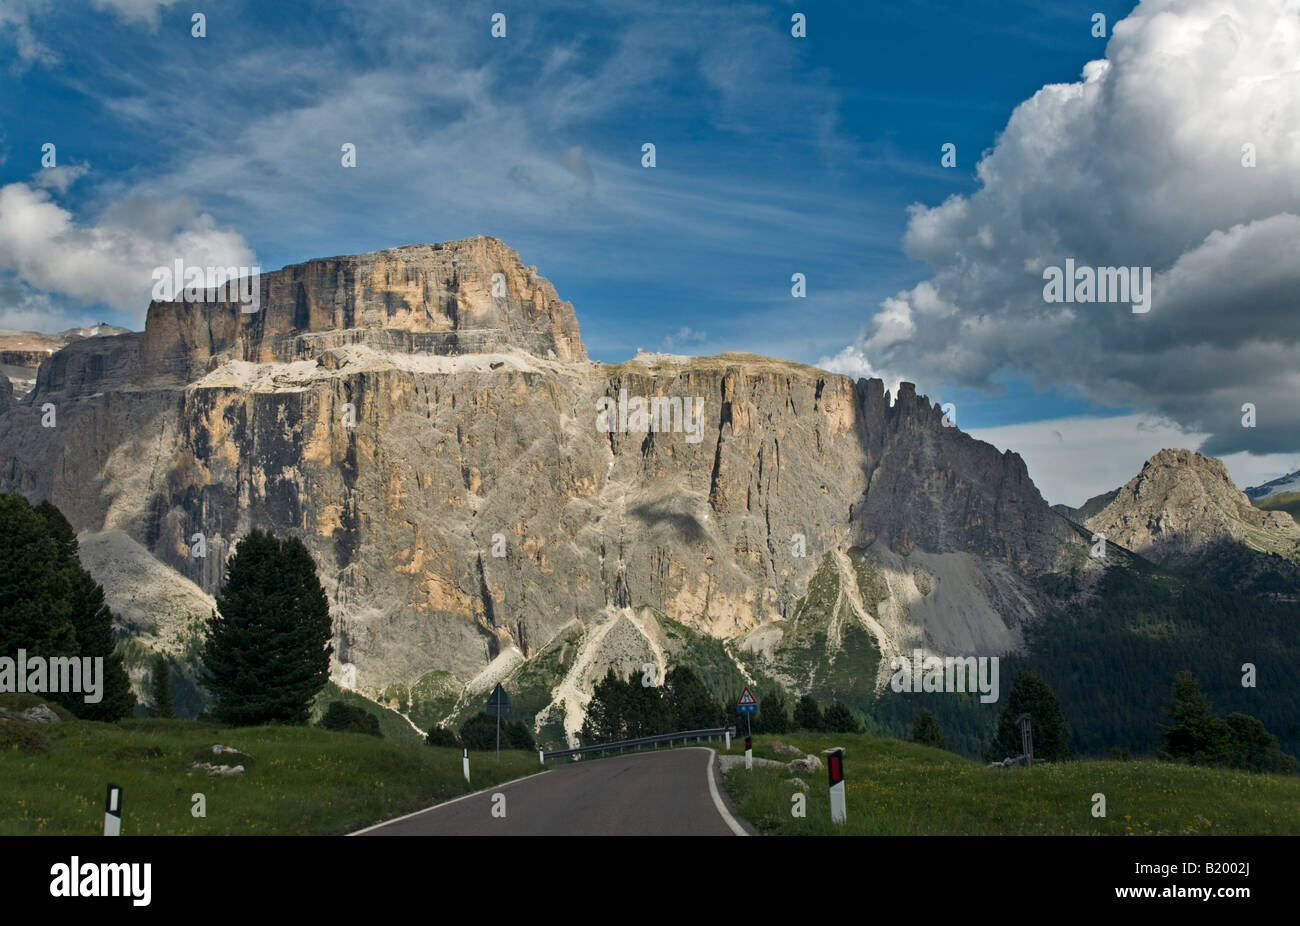 Sella Massif as seen from the Sella Pass, Dolomites, Italy Stock Photo